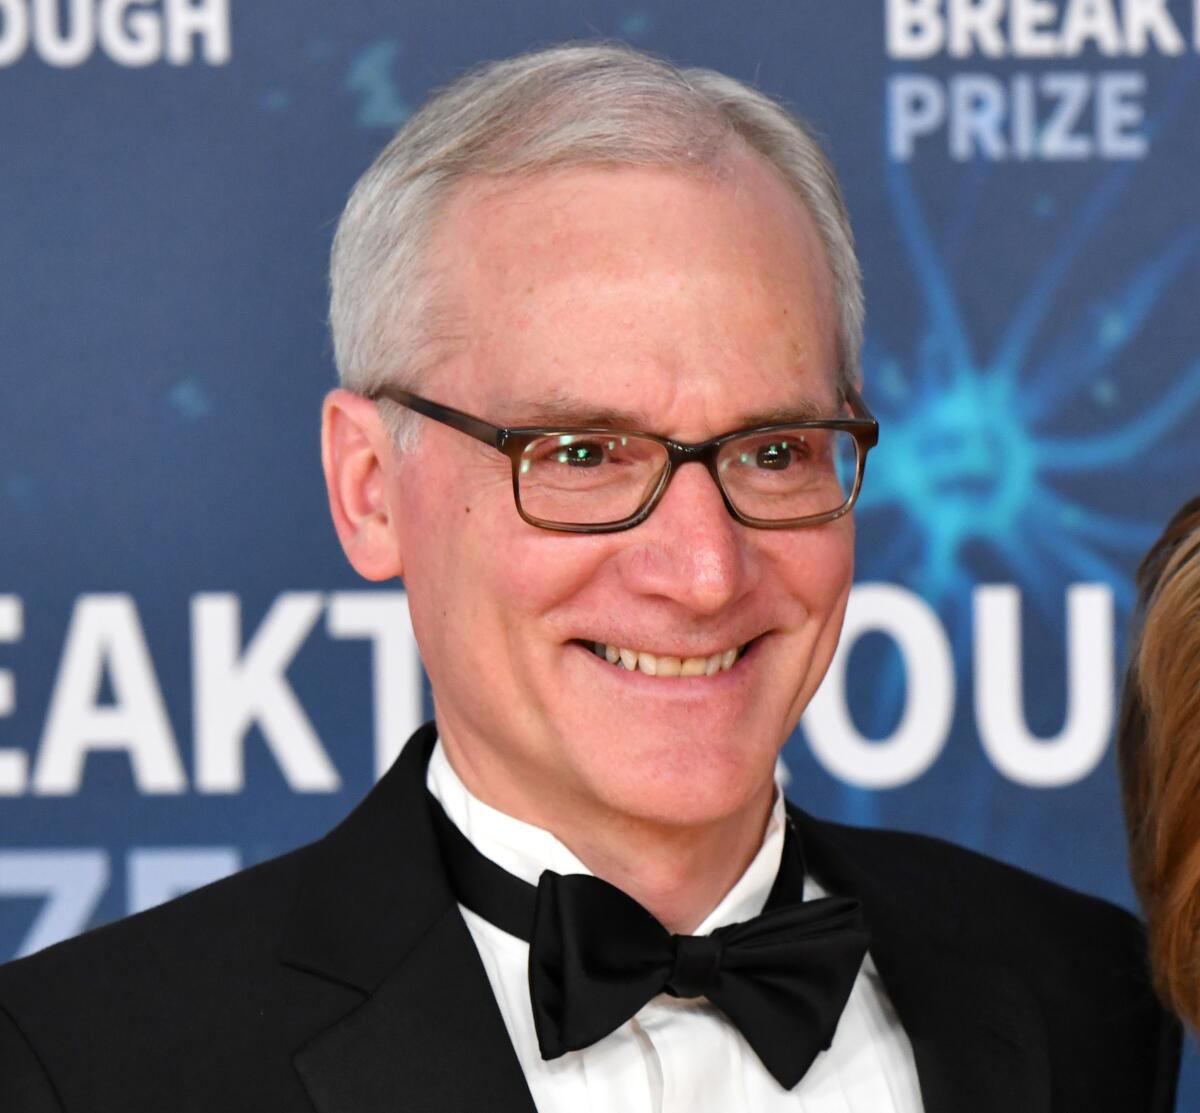 A smiling man wearing eyeglasses and a bow tie.